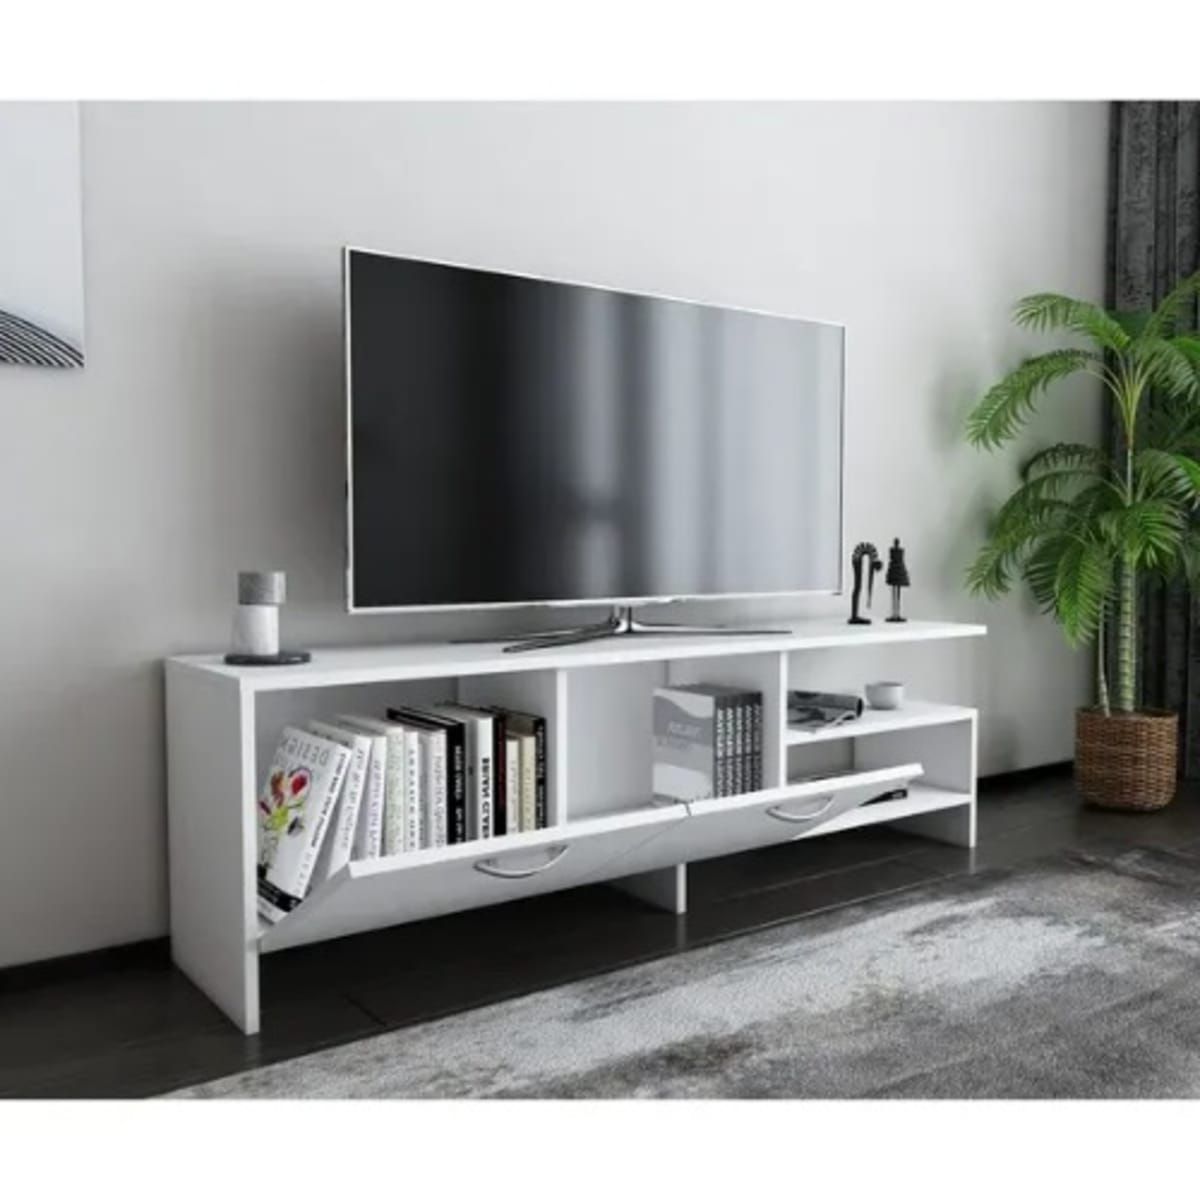 Modern Tv Stand Modern With Storage – White | Konga Online Shopping Within Modern Stands With Shelves (View 13 of 20)